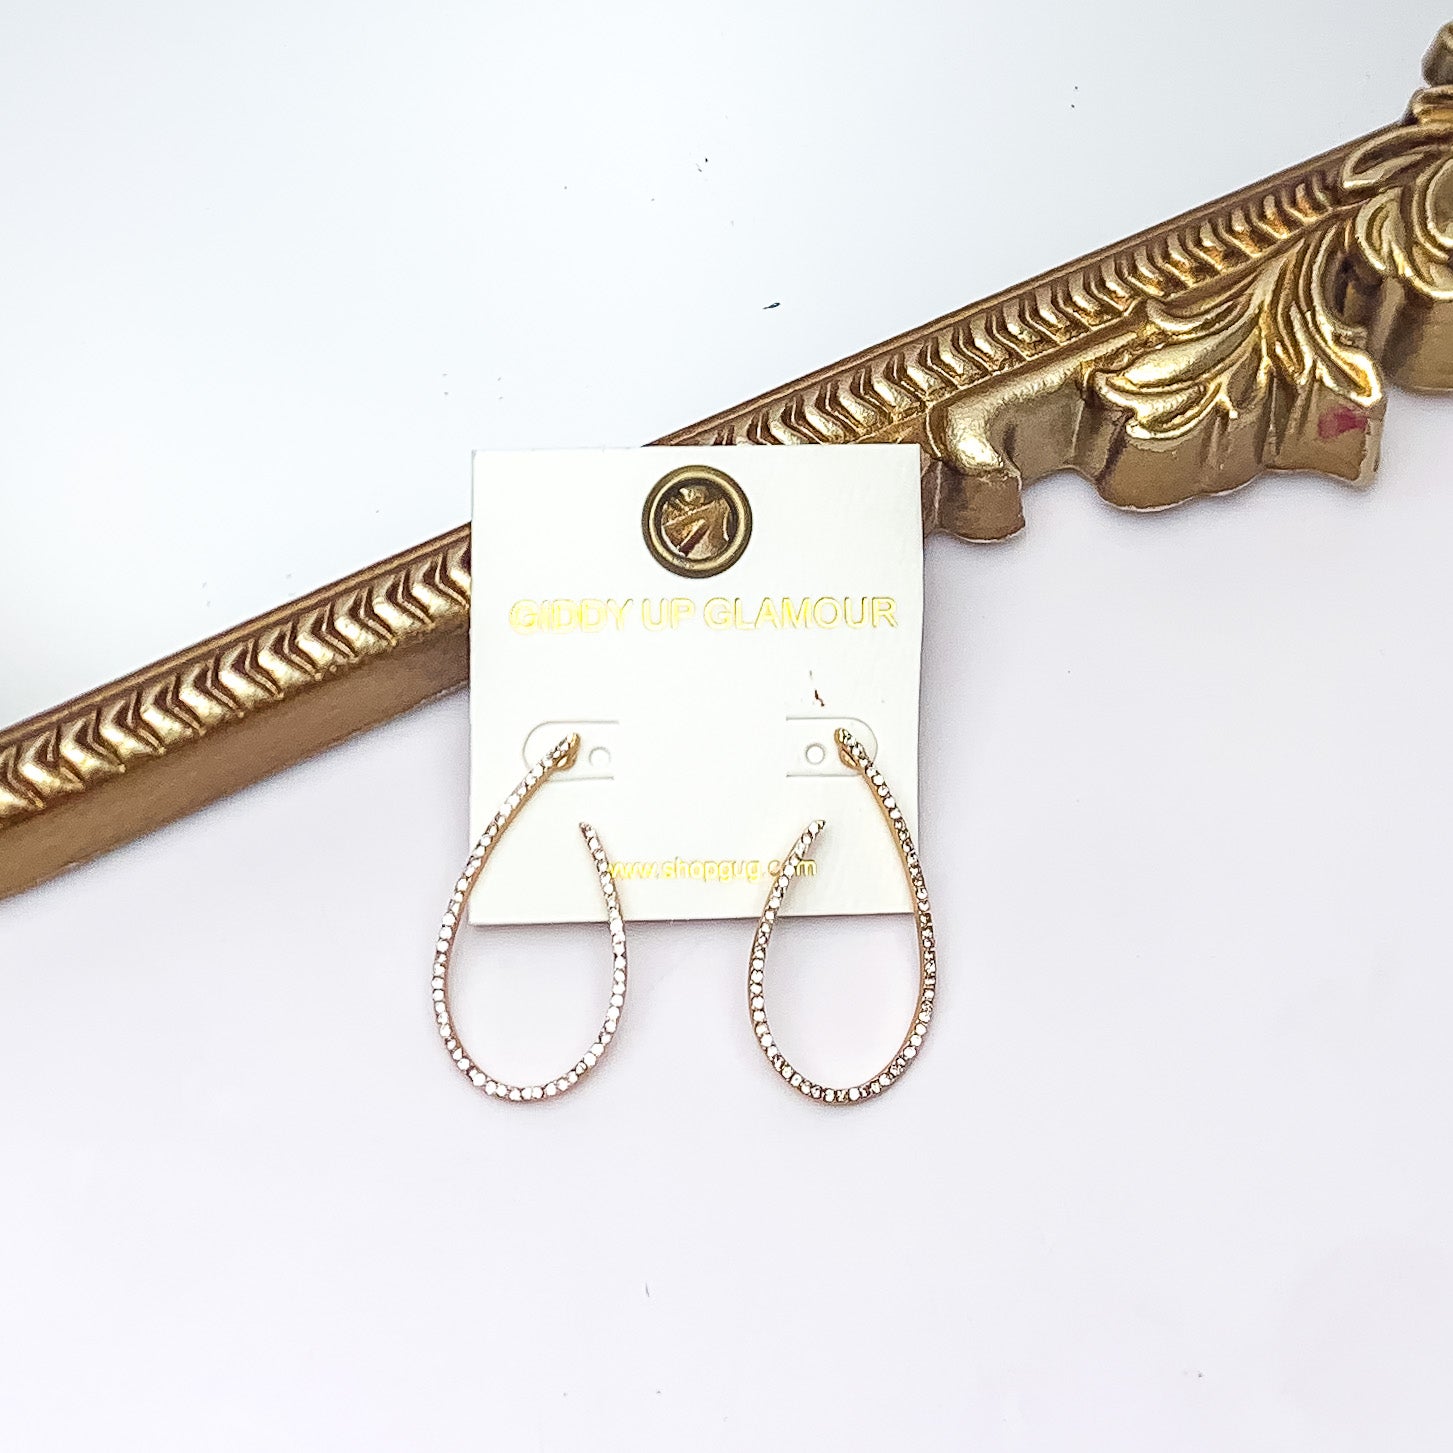 Classy and Confident Open Teardrop Earrings With Clear Crystals in Gold Tone. Pictured on a white background with a gold frame behind the earrings. 